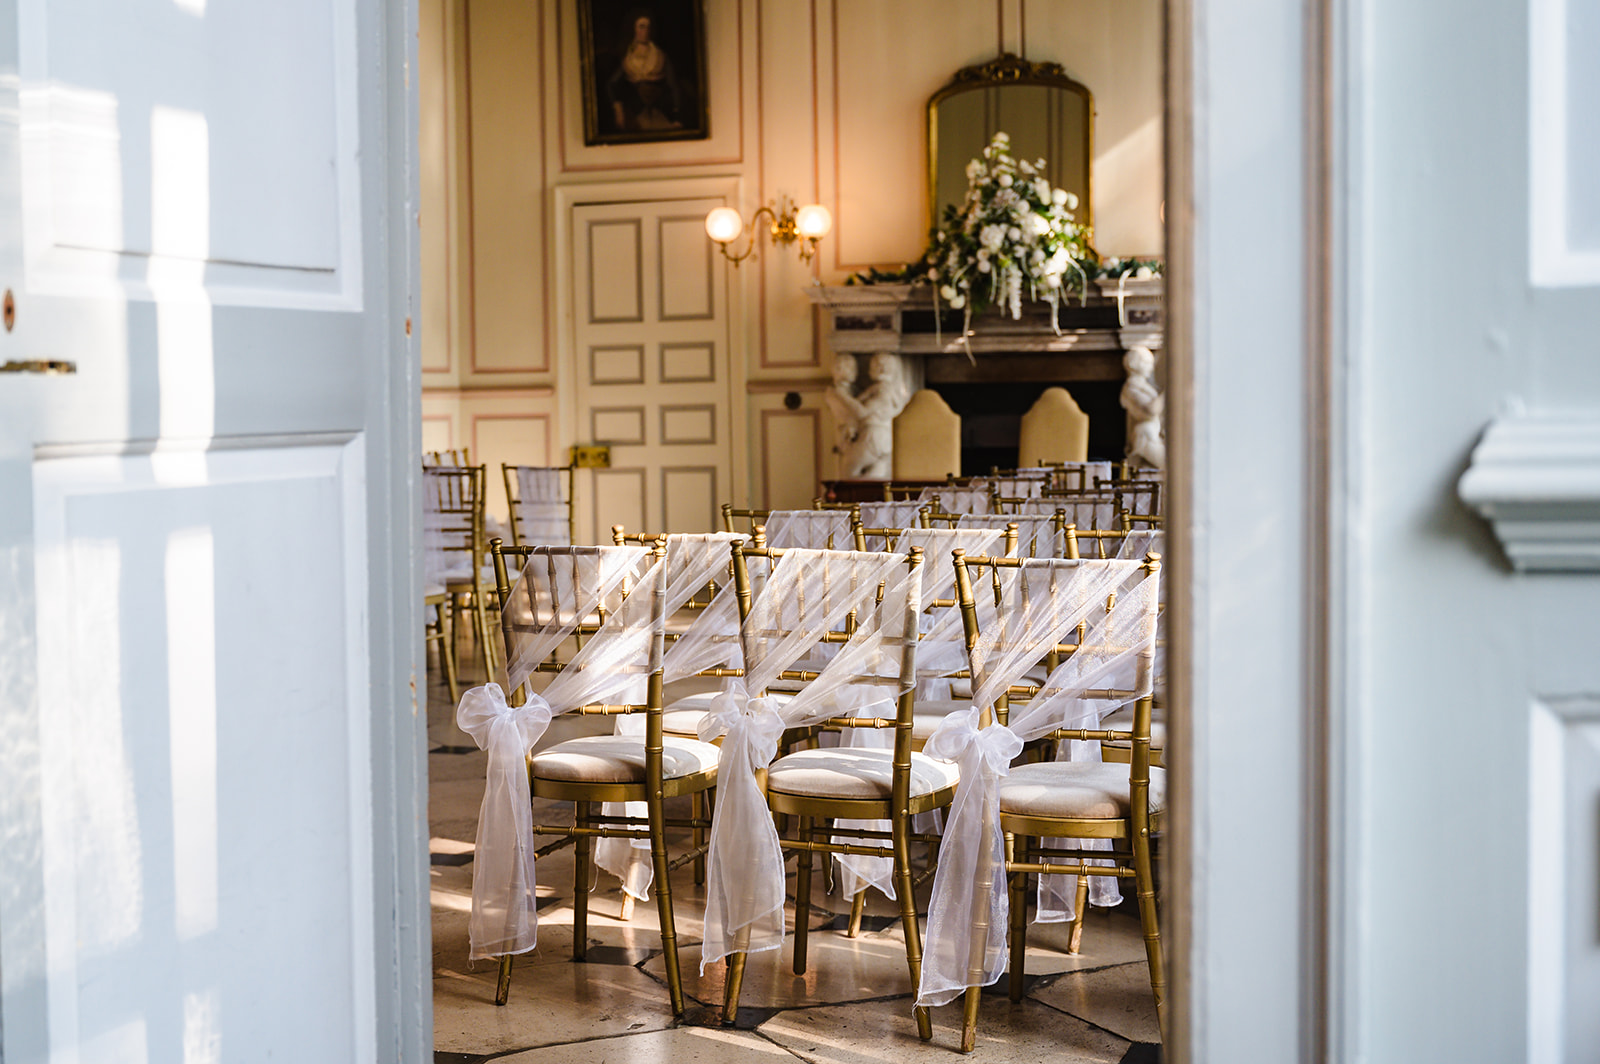 The ceremony room at Gosfield hall with white chair sashes and white and green florals